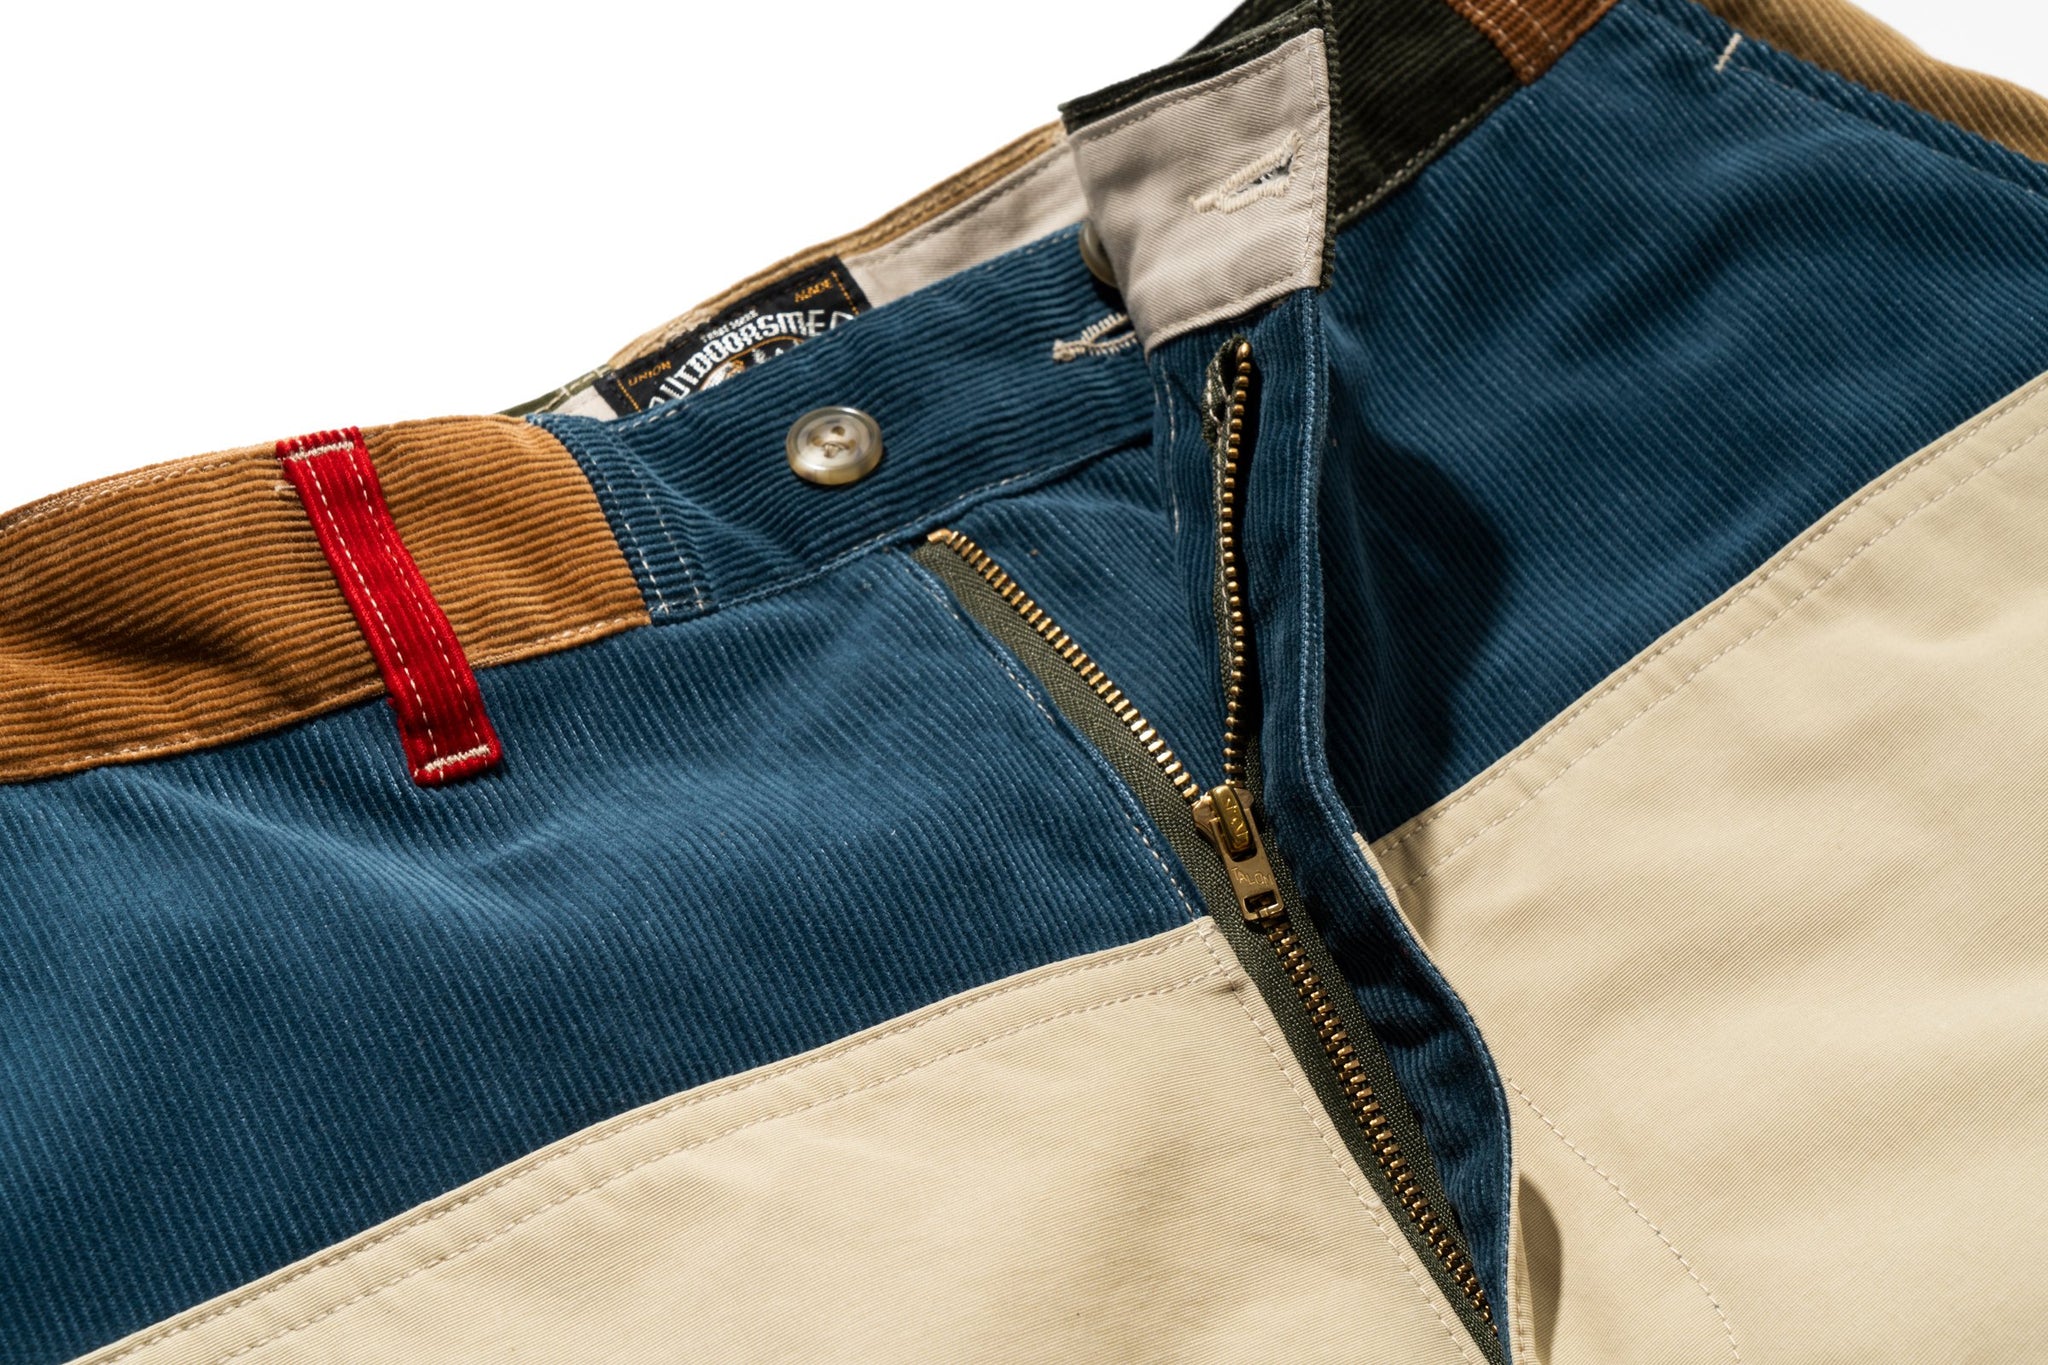 MULTICOLOR CORDUROY HUNTING TROUSERS